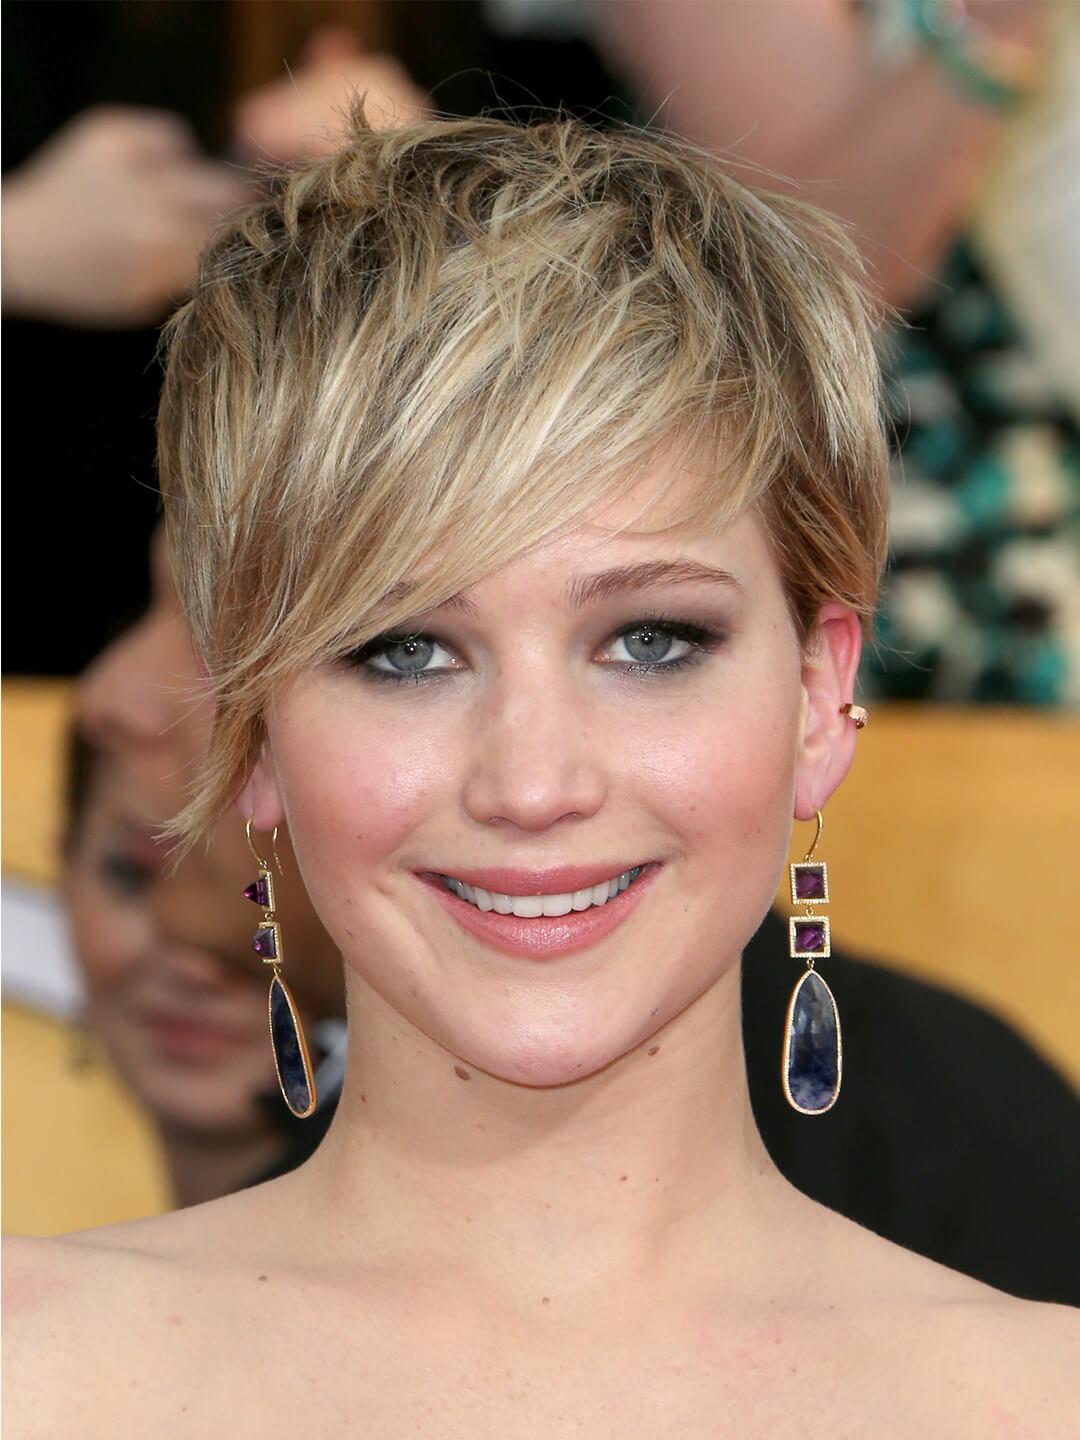 Jennifer Lawrence rocking a layered pixie cut hairstyle with side-swept bangs